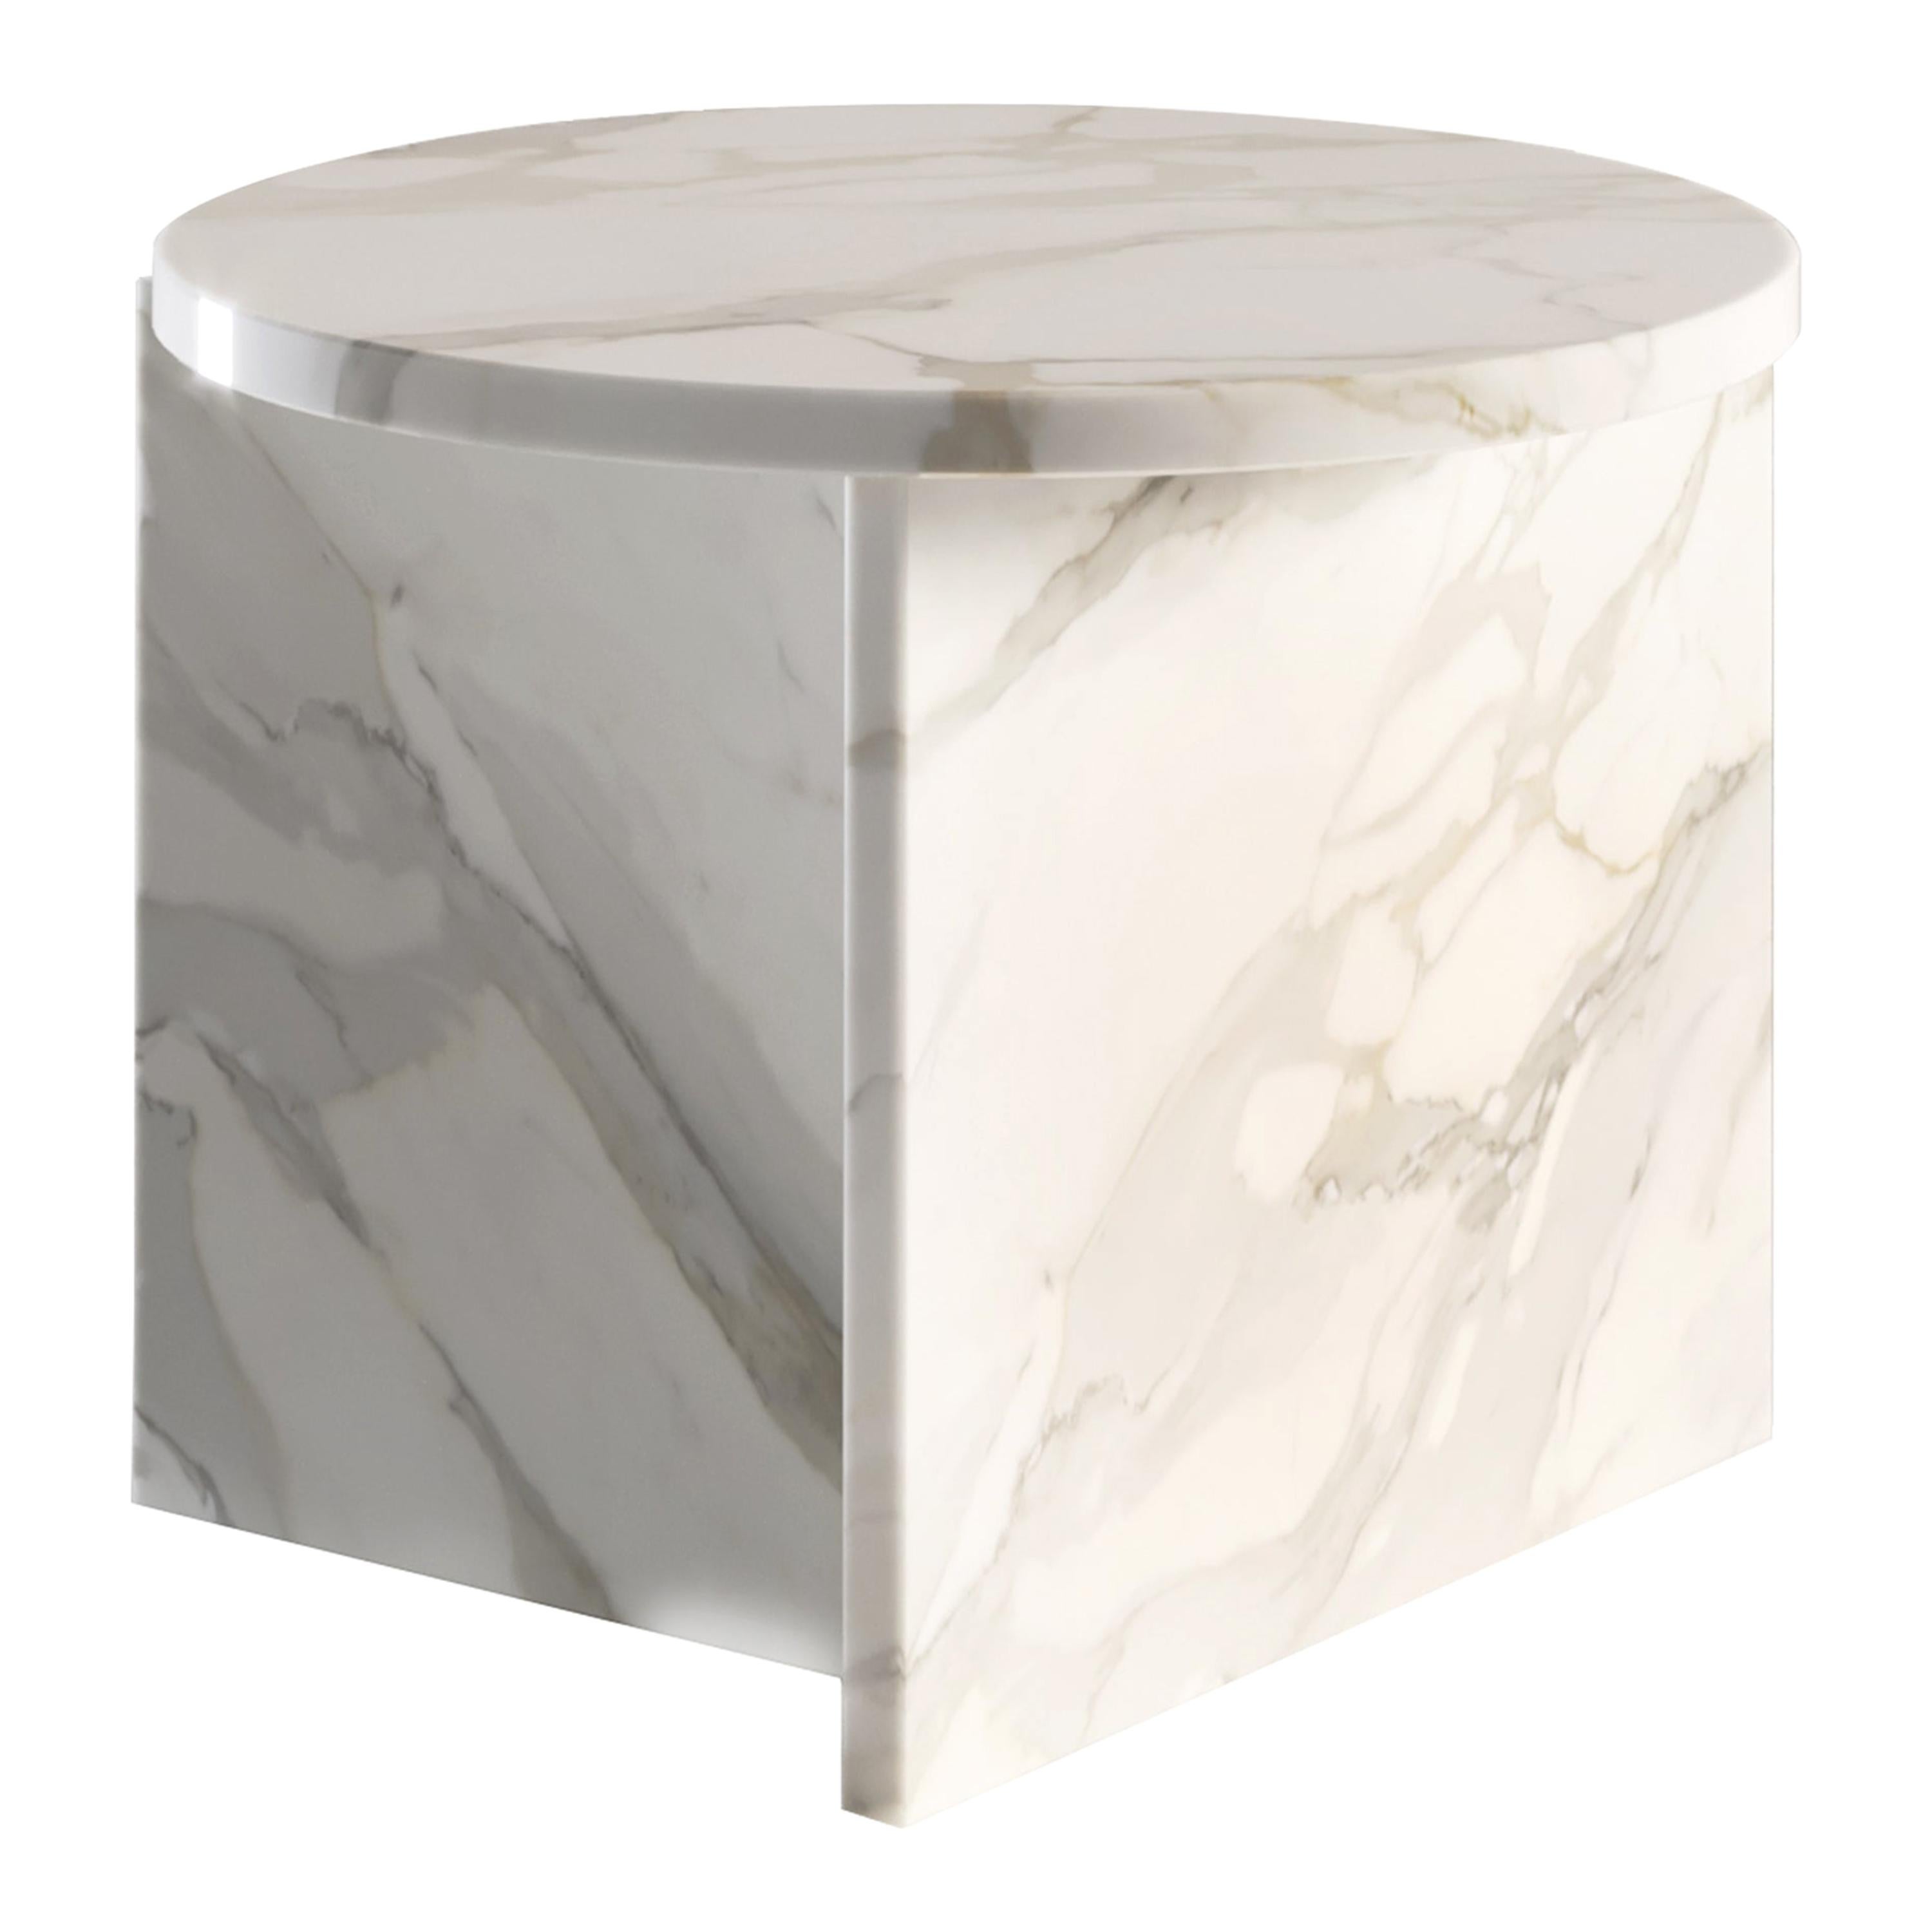 Origin Contemporary Side Table in Marble by Secolo